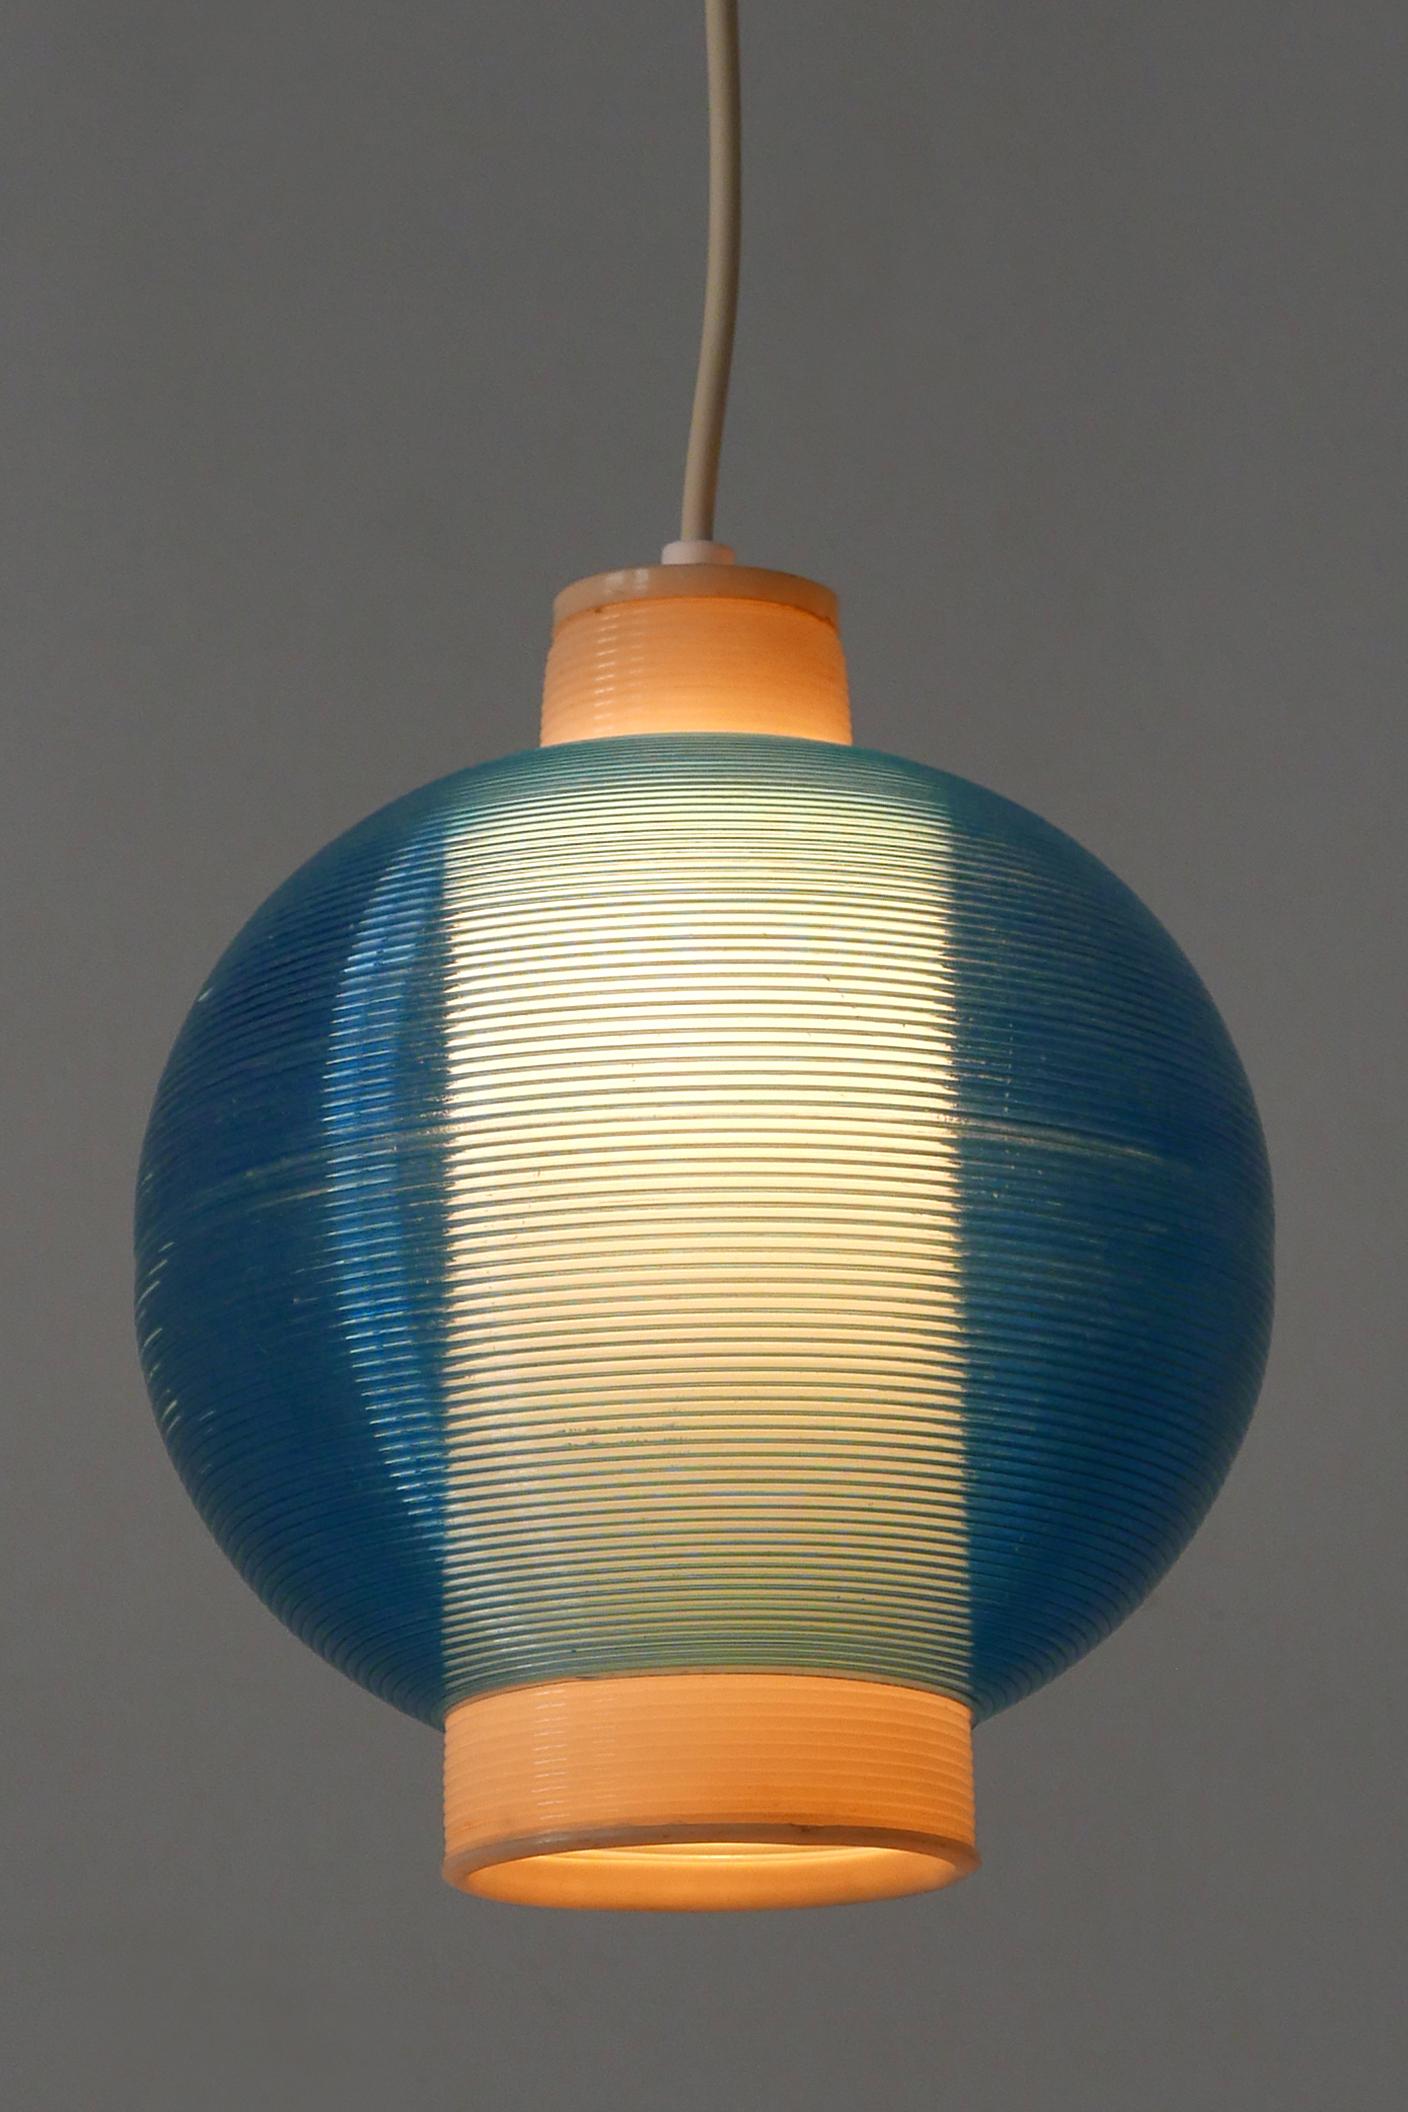 Rare and lovely Mid-Century Modern pendant lamp or hanging light. Designed by Yasha Heifetz for Rotaflex Heifetz, 1960s, USA.

Executed in spun plastic, it comes with 1 x E14 / E12 Edison screw fit bulb holder, is rewired and in working condition.